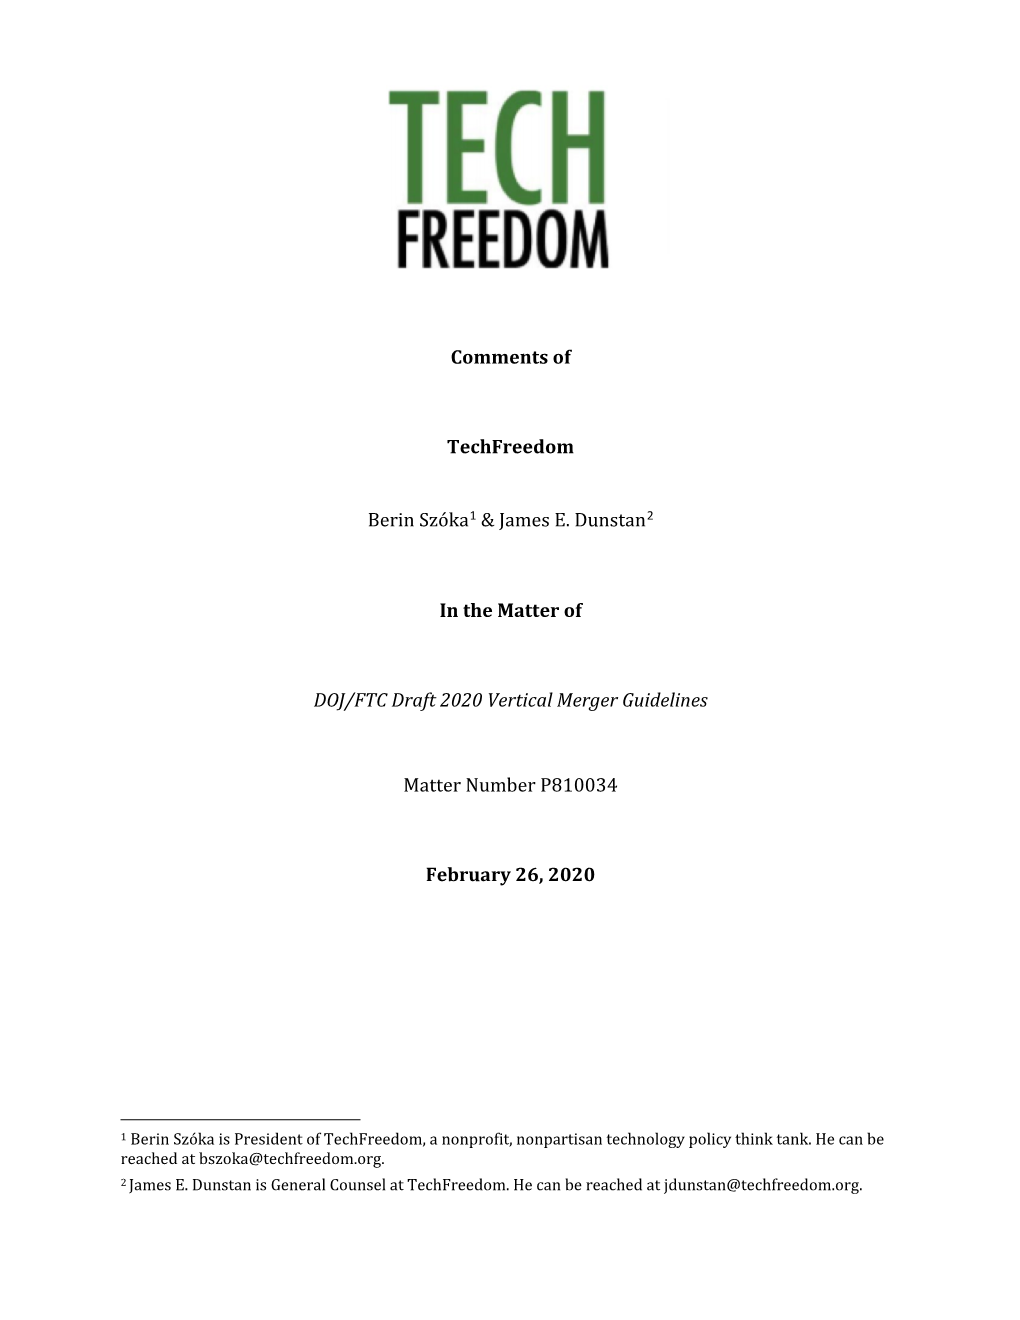 Comments of Techfreedom in the Matter of DOJ/FTC Draft 2020